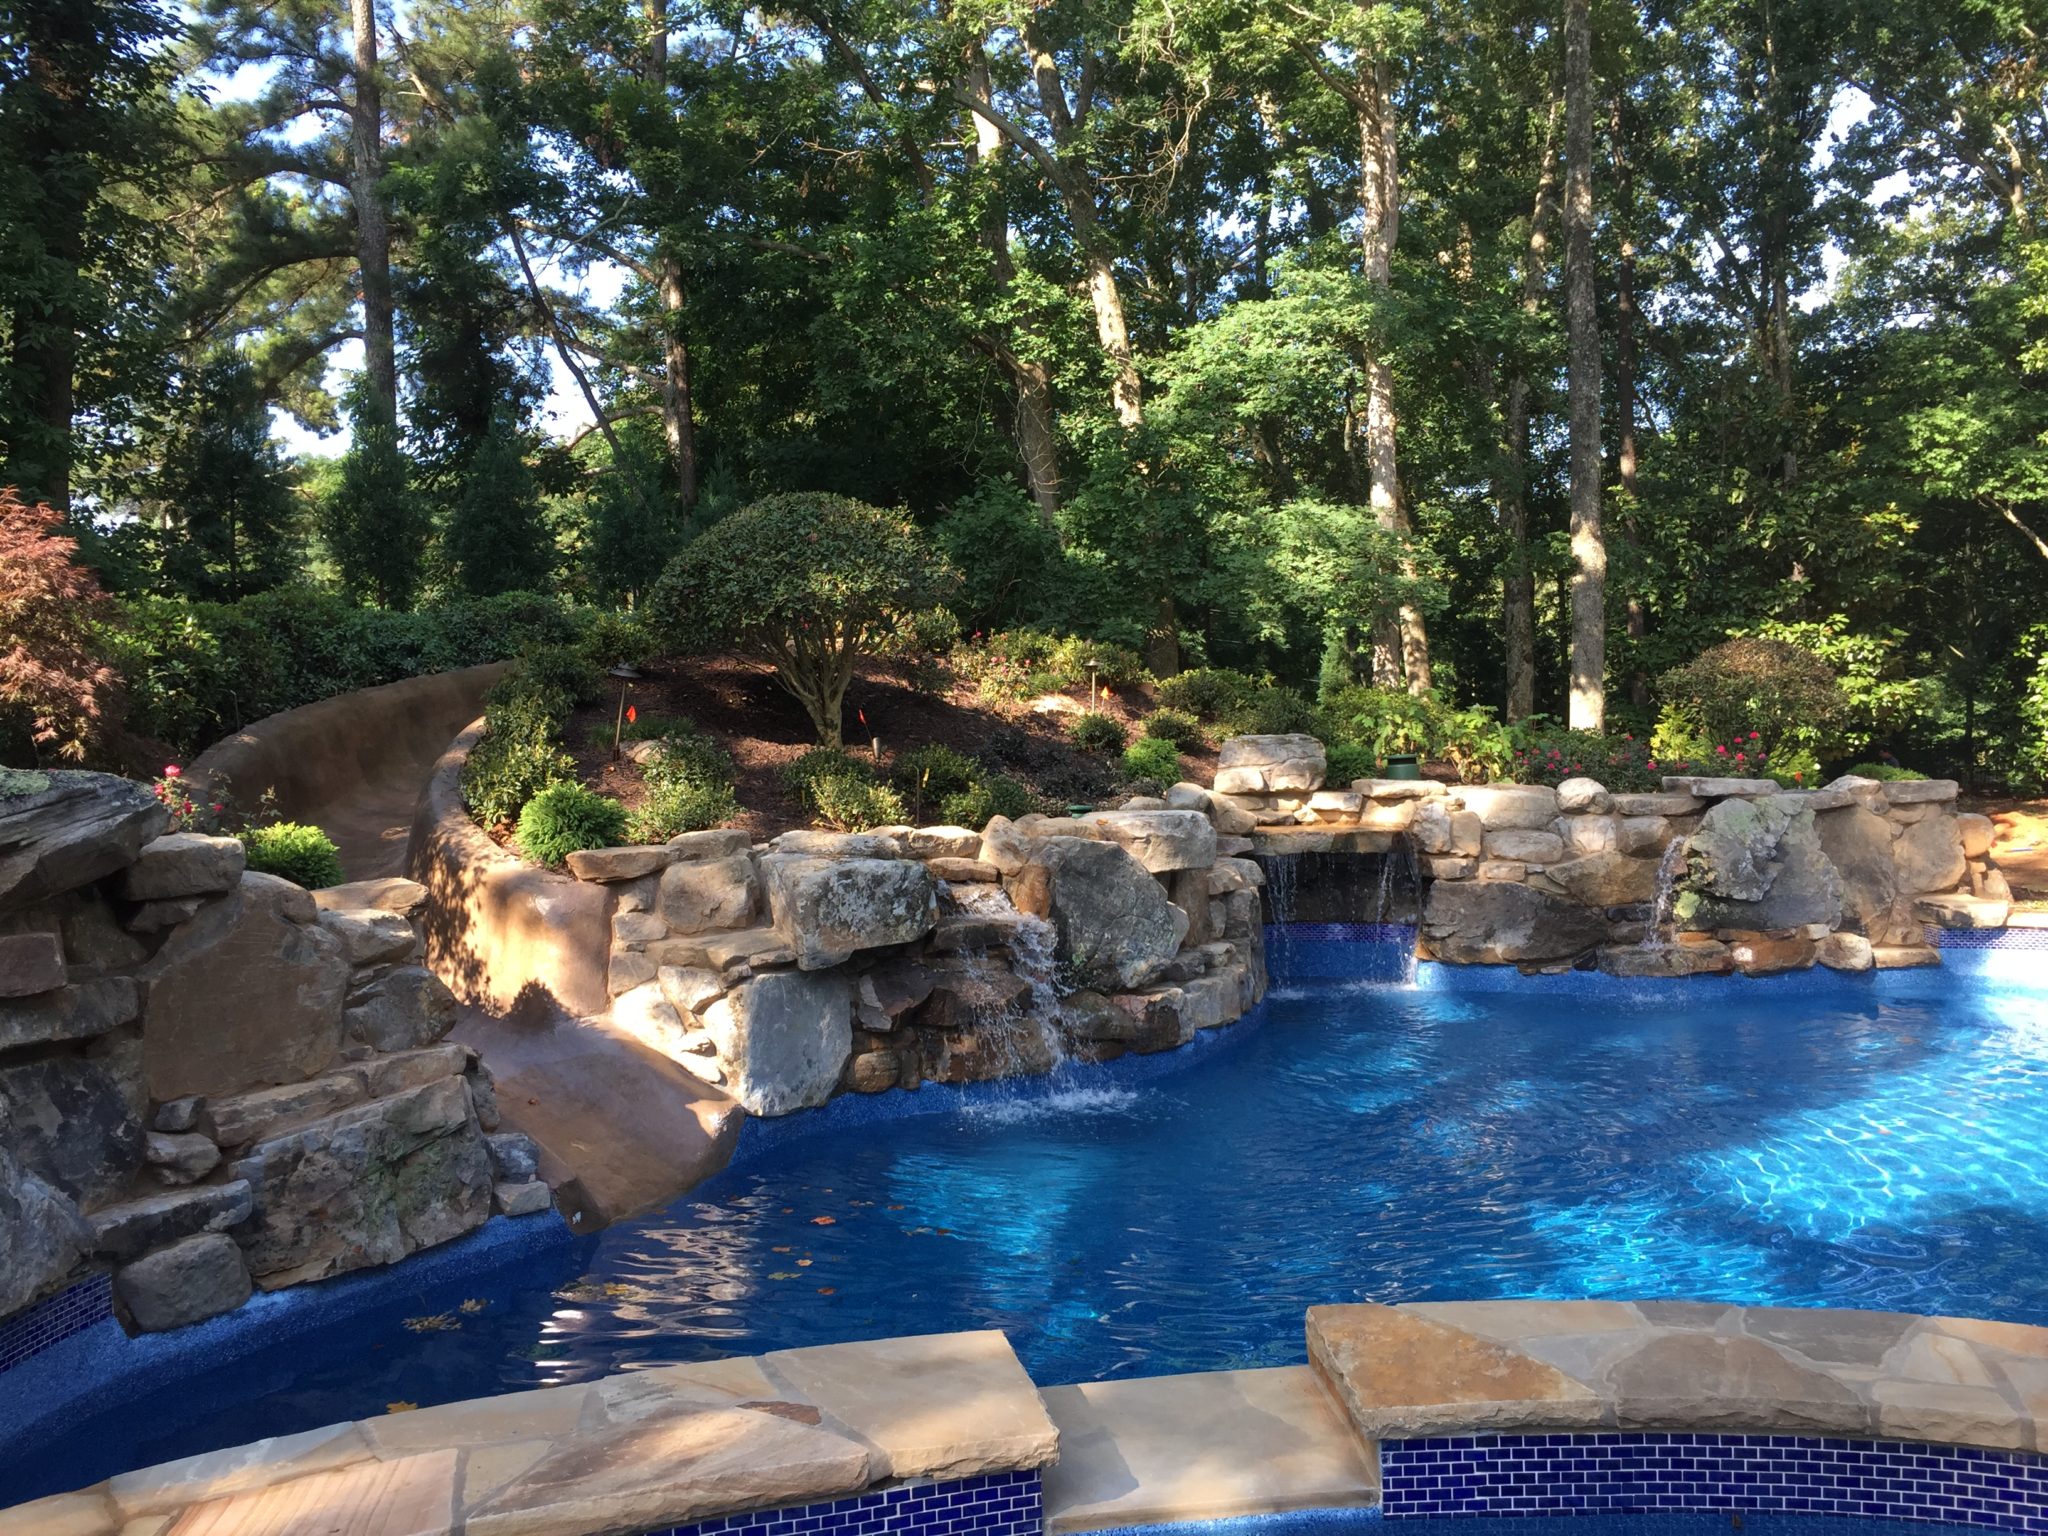 A custom freeform pool featuring a boulder waterfall grotto and slide surrounded by lush greenery and lounge chairs.